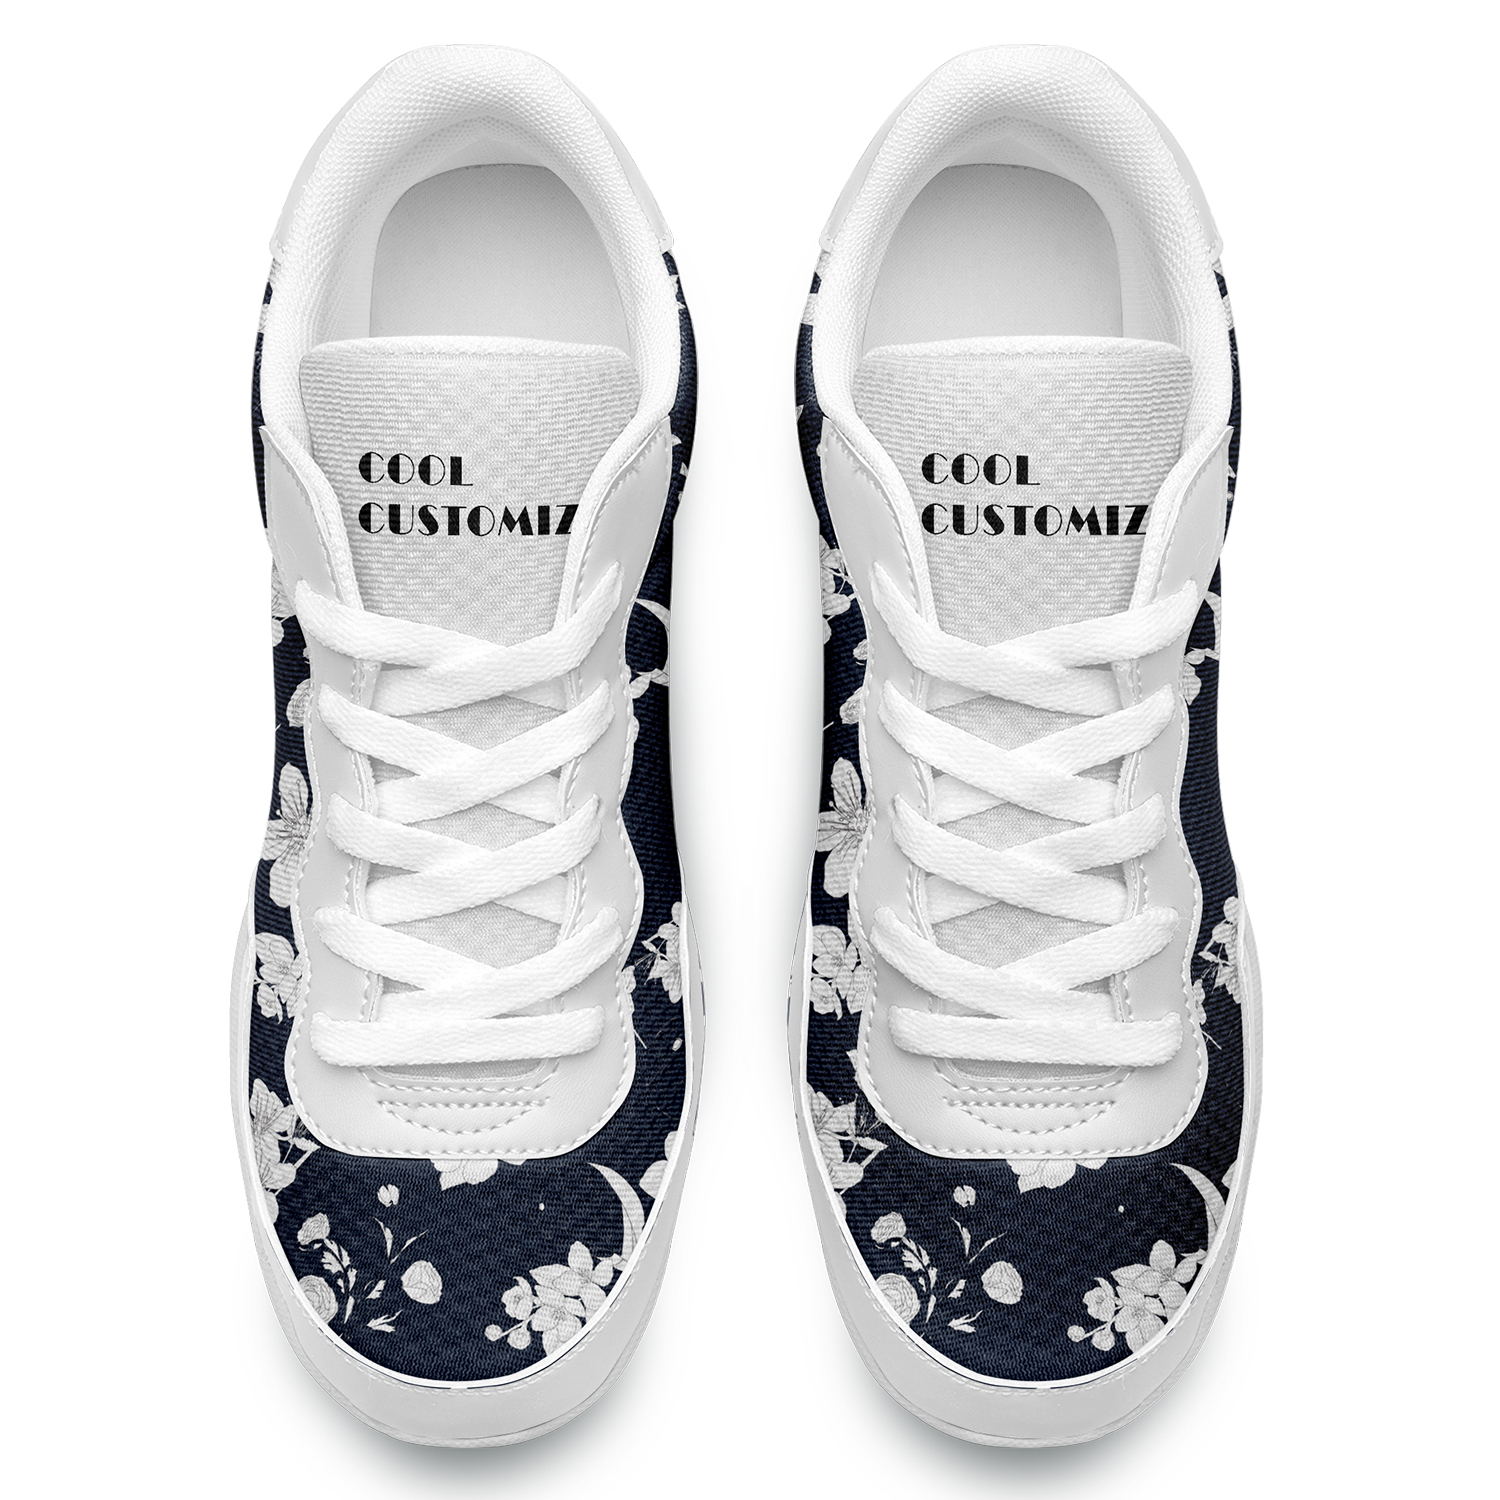 Factory Wholesale Customized Cheer Shoes Women Personalized Design Printing Cheerleading Training Dance Sneakers